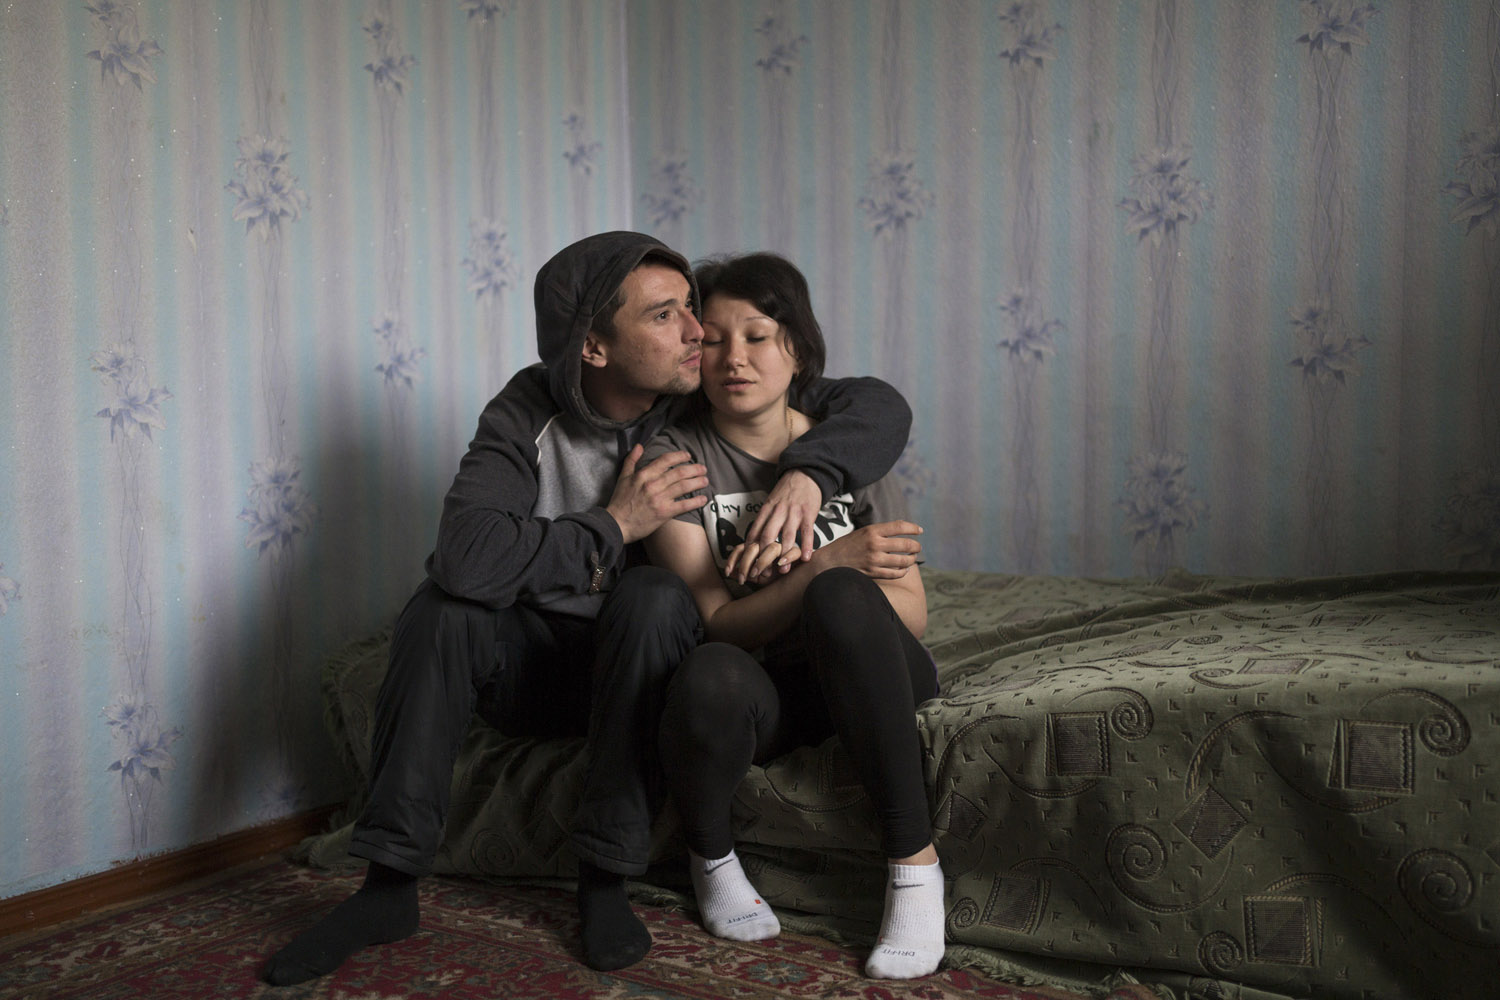 Renat (28) and Regina (20), Shakhtiorsk. He has worked in mines for eight years, mostly in illegal ones. They want to get married, but still have not been able to save enough money to do so.